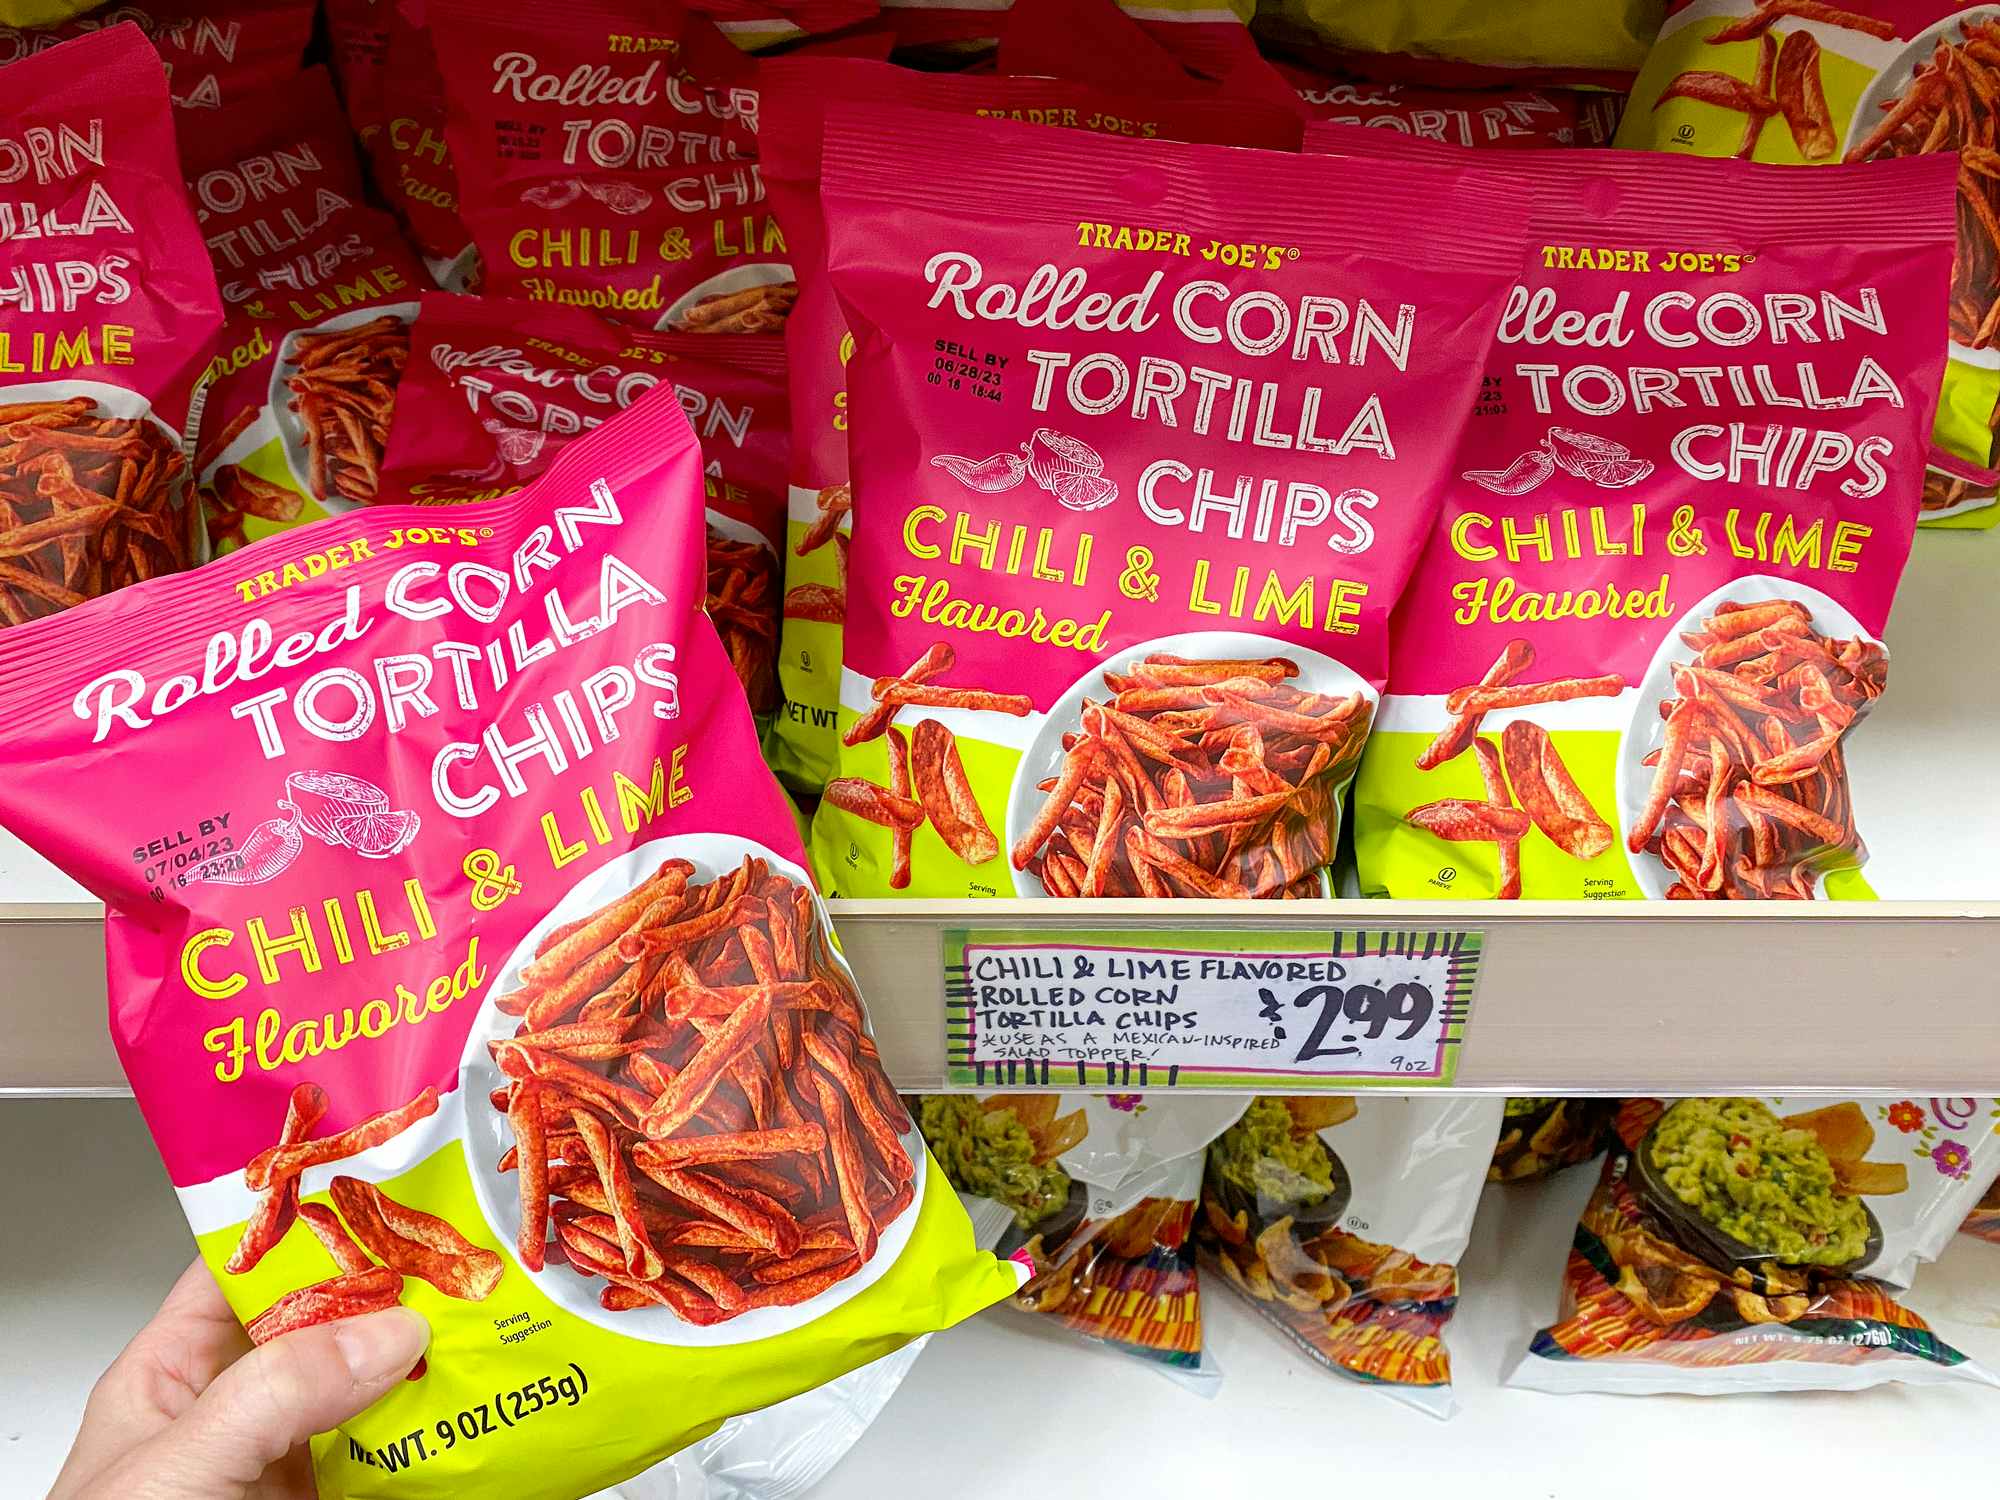 trader joes chili and lime-flavored rolled corn tortilla chips on store shelf